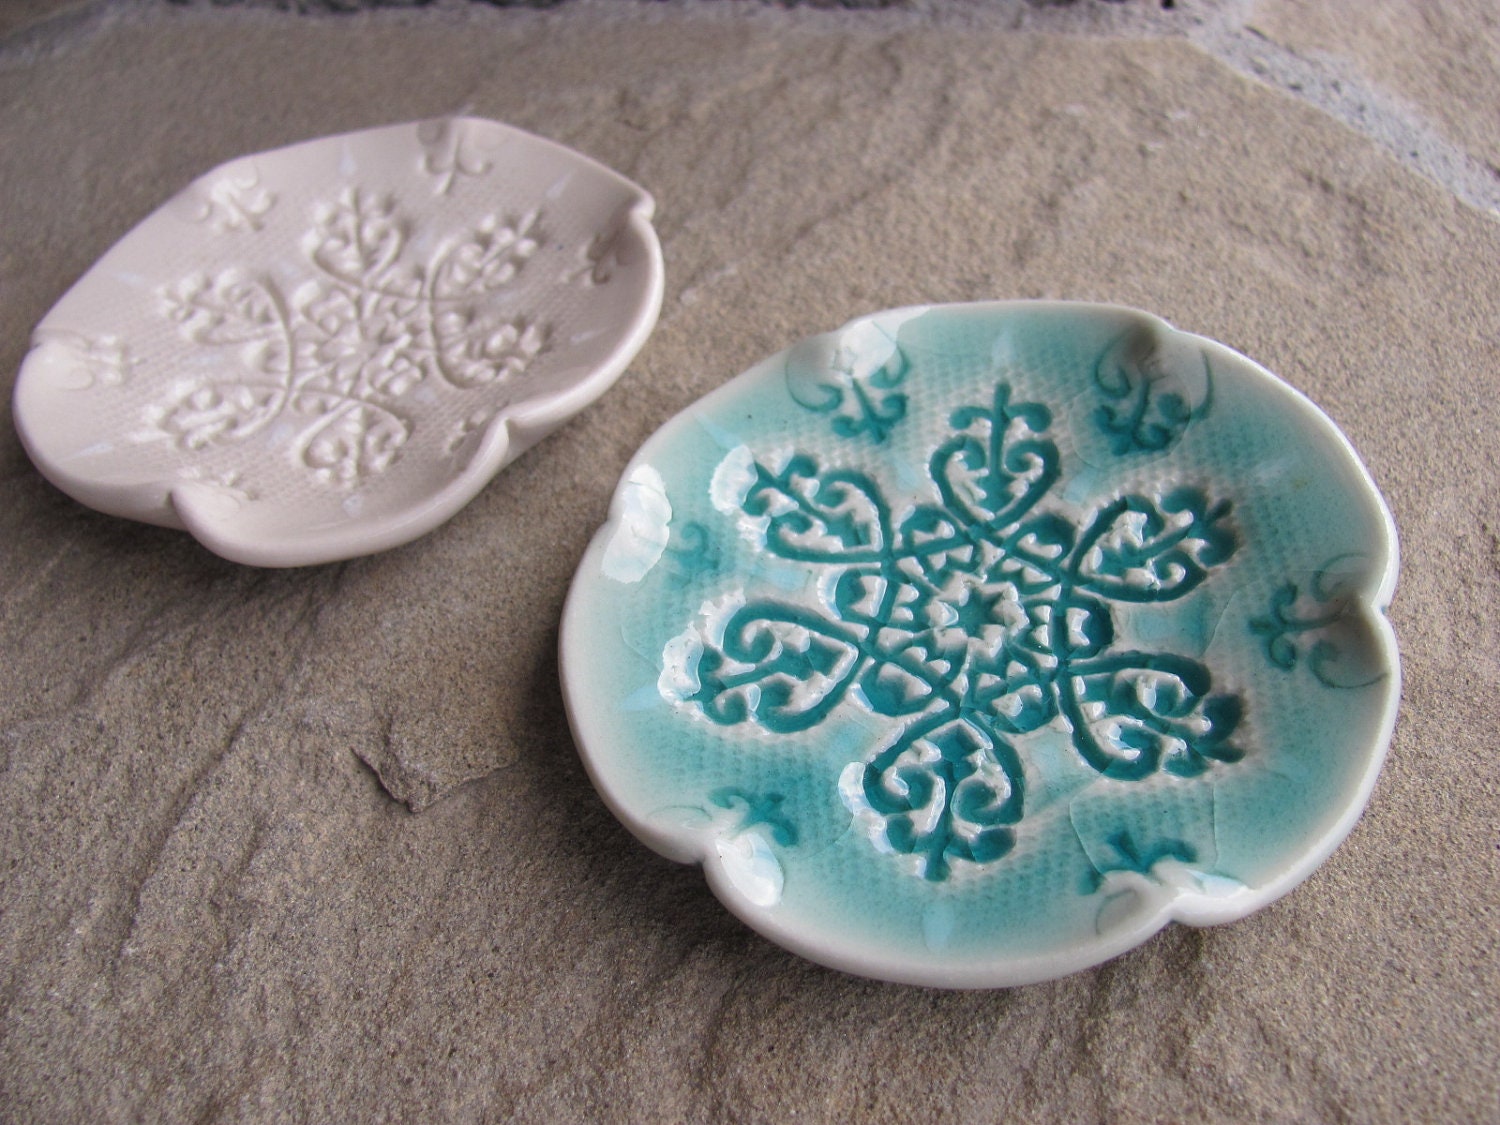 Trinket Dish Ceramic White or Aqua Blue Porcelain Stamped with Snowflake Textured Winter Snow Ice